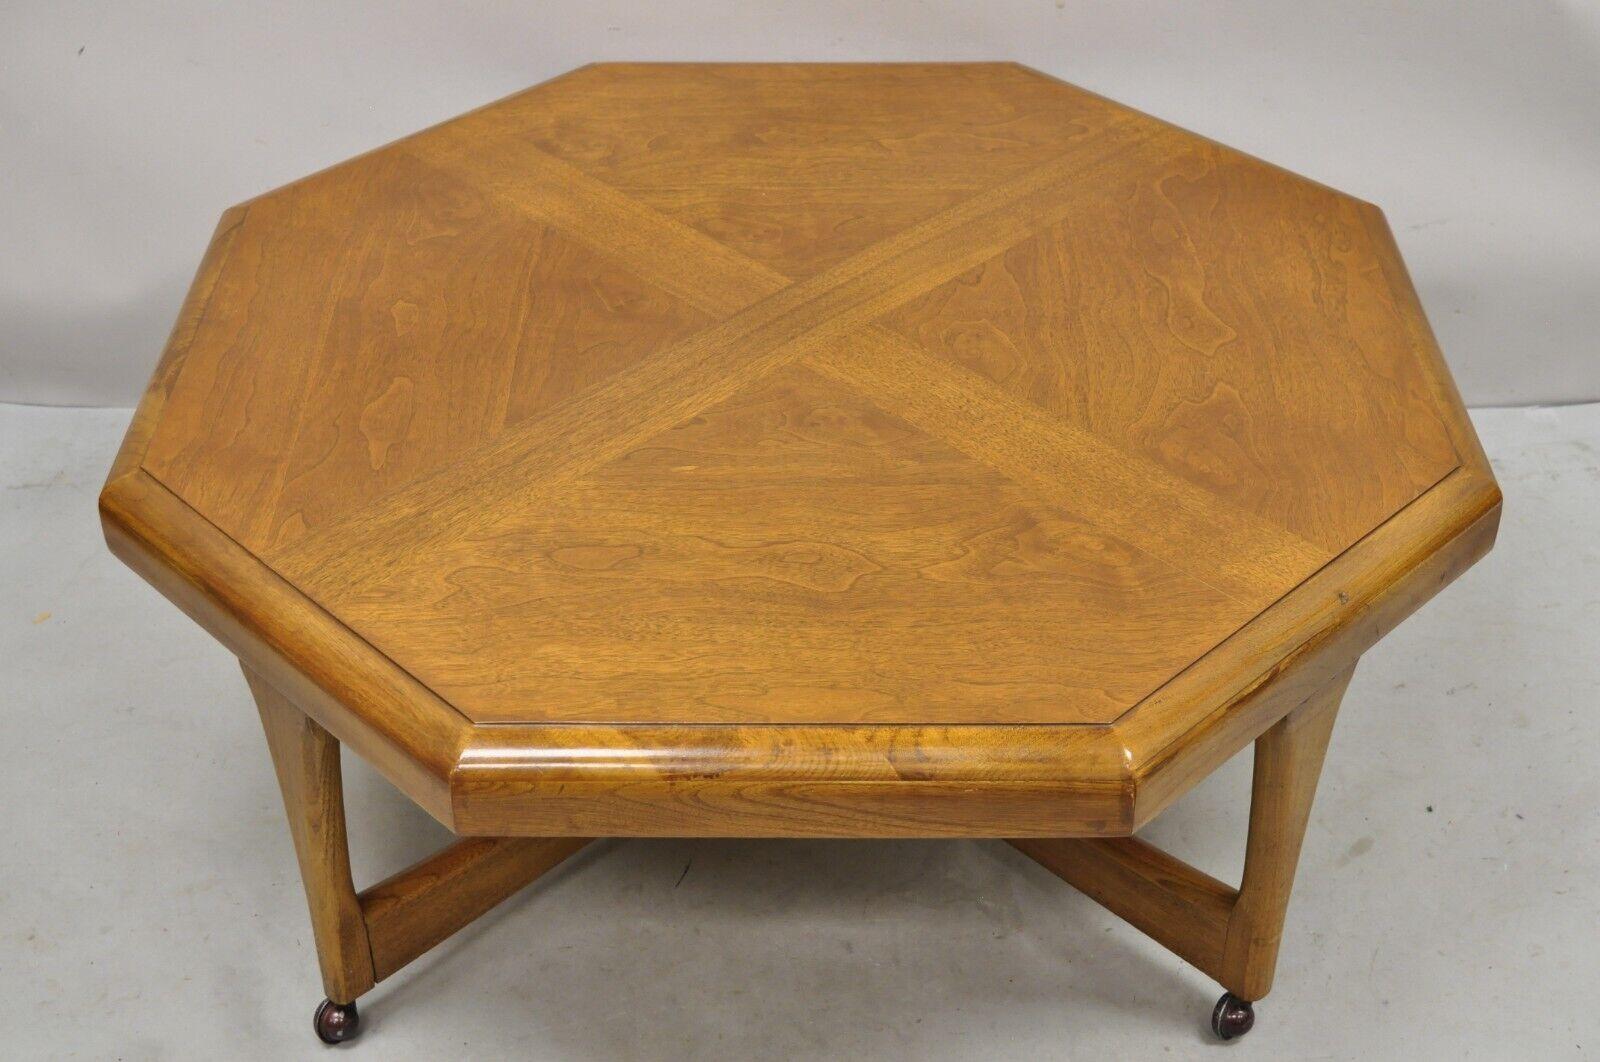 Lane Mid-Century Modern Walnut Octagonal Stretcher Base Coffee Table In Good Condition For Sale In Philadelphia, PA